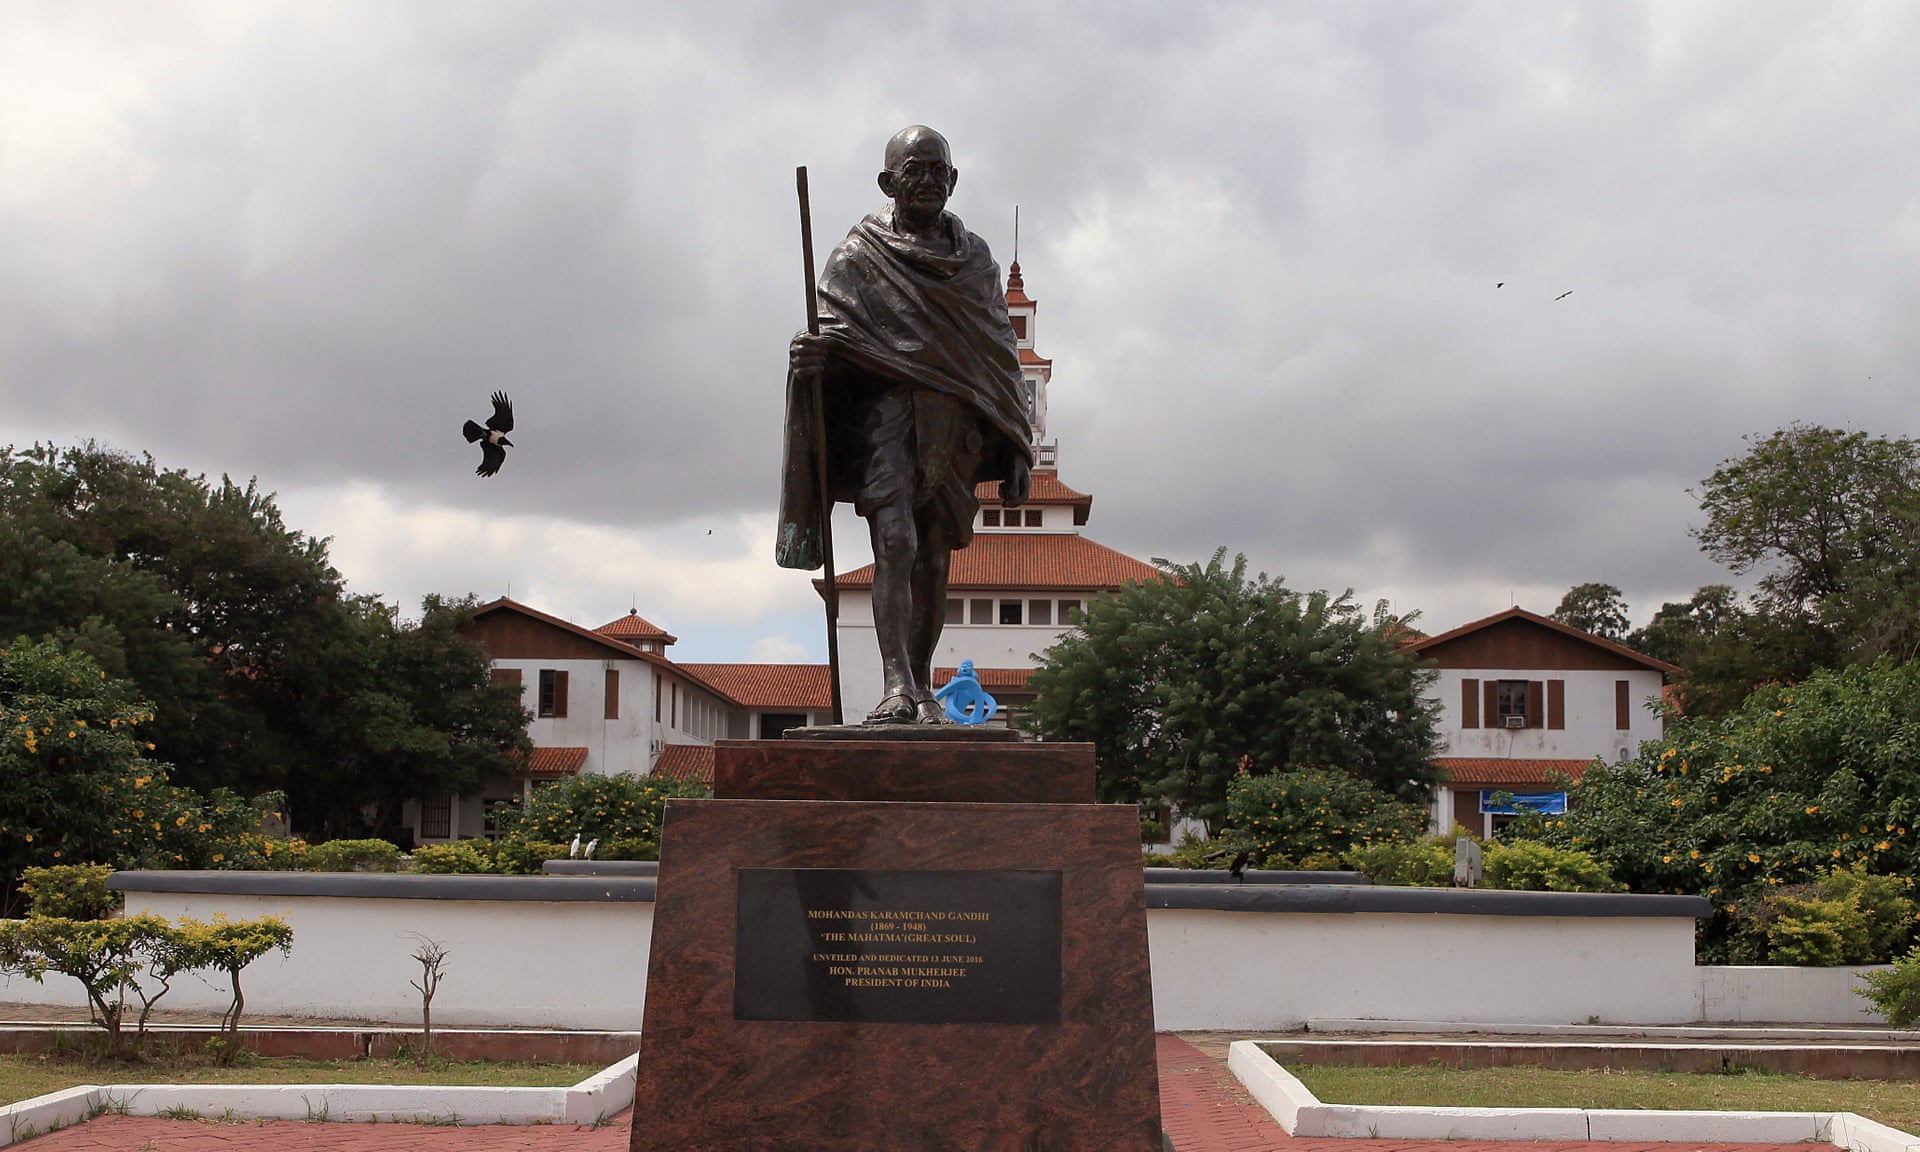 A statue of Indian independence leader Mahatma Gandhi in Accra, Ghana. The statue at the university was removed in the middle of the night leaving a bare plinth.